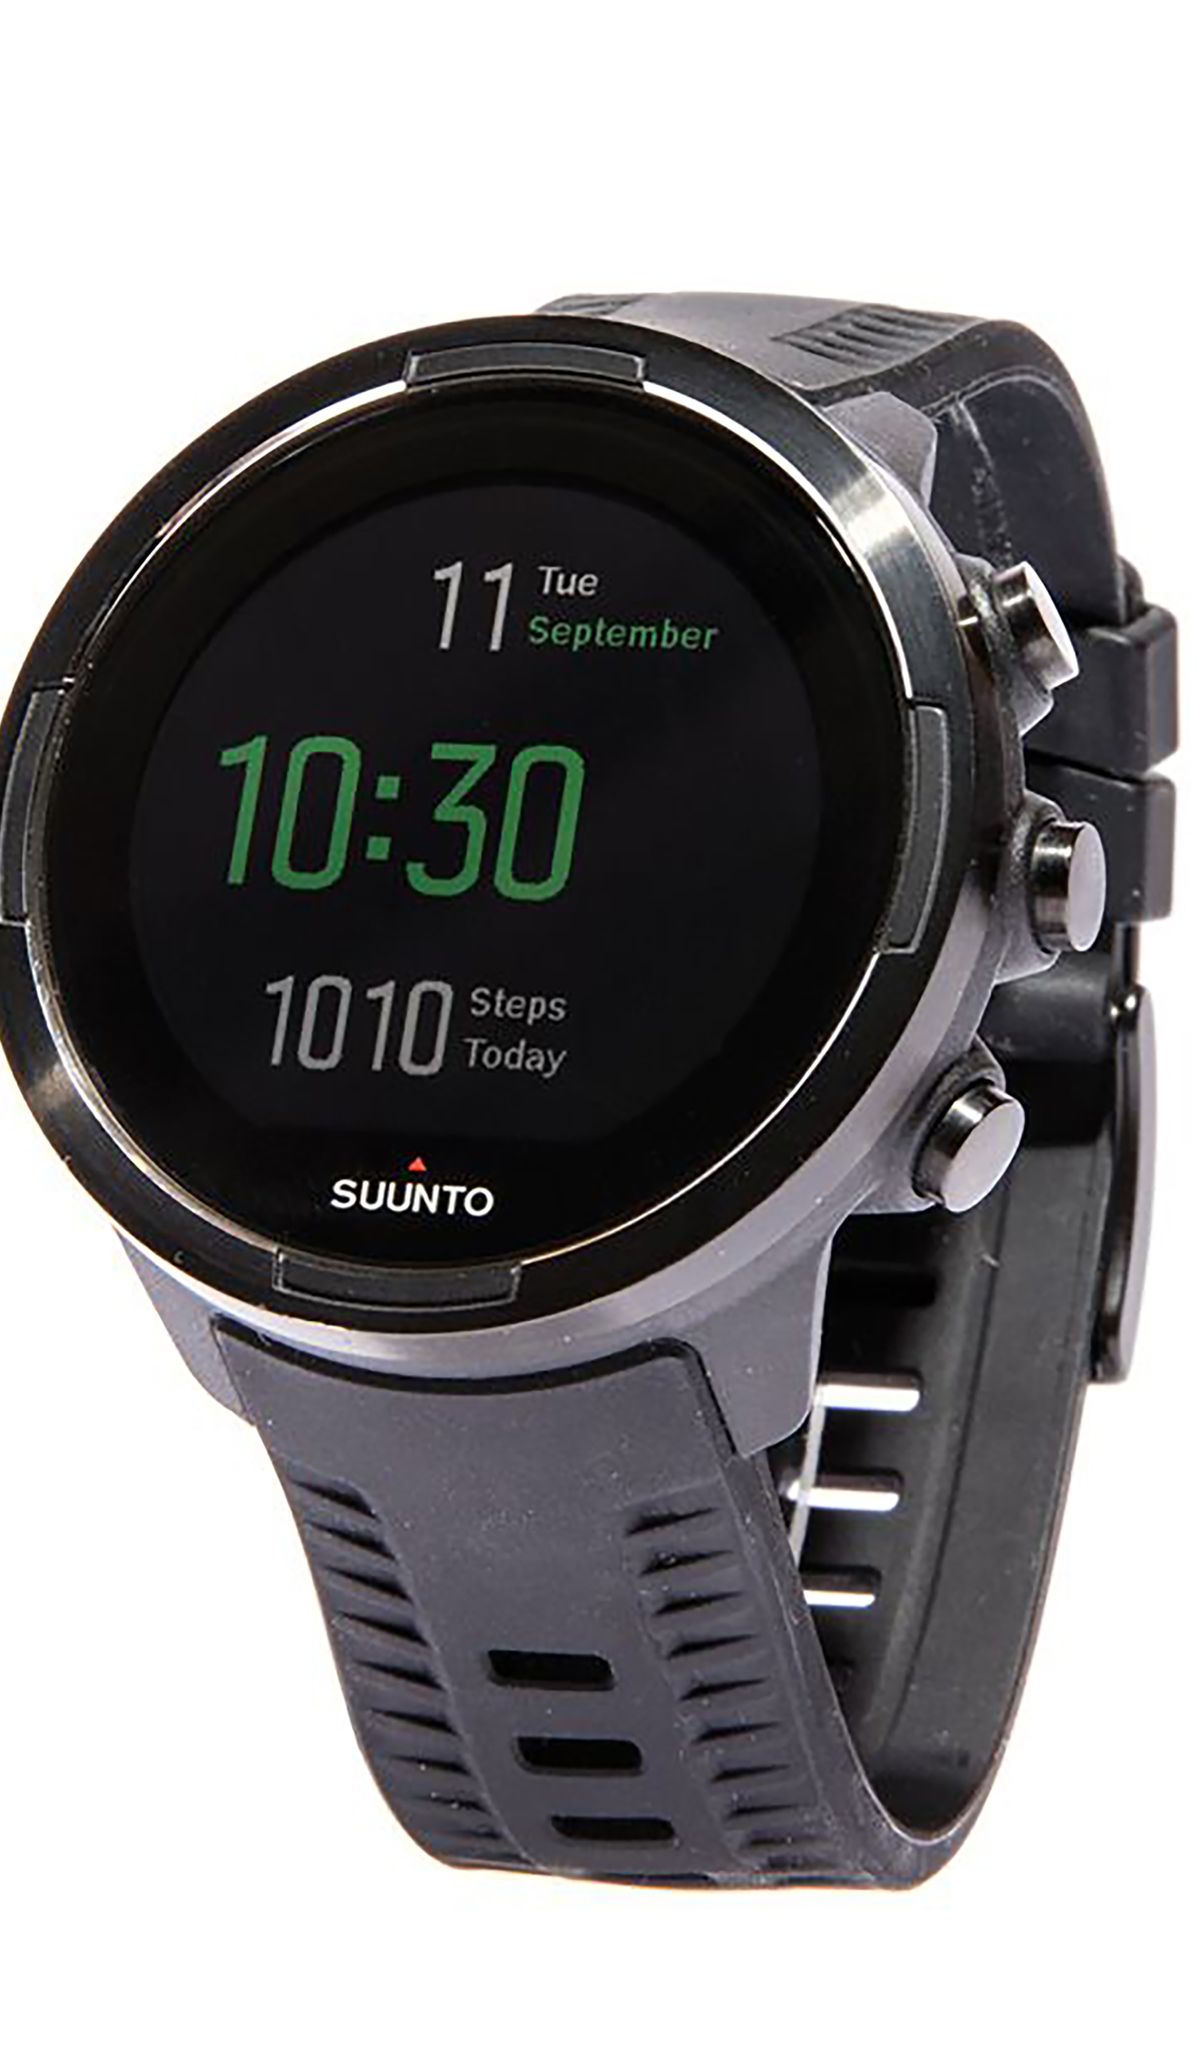 Suunto 9 Multisport GPS Watch with BARO and Wrist-Based Heart Rate (Black)